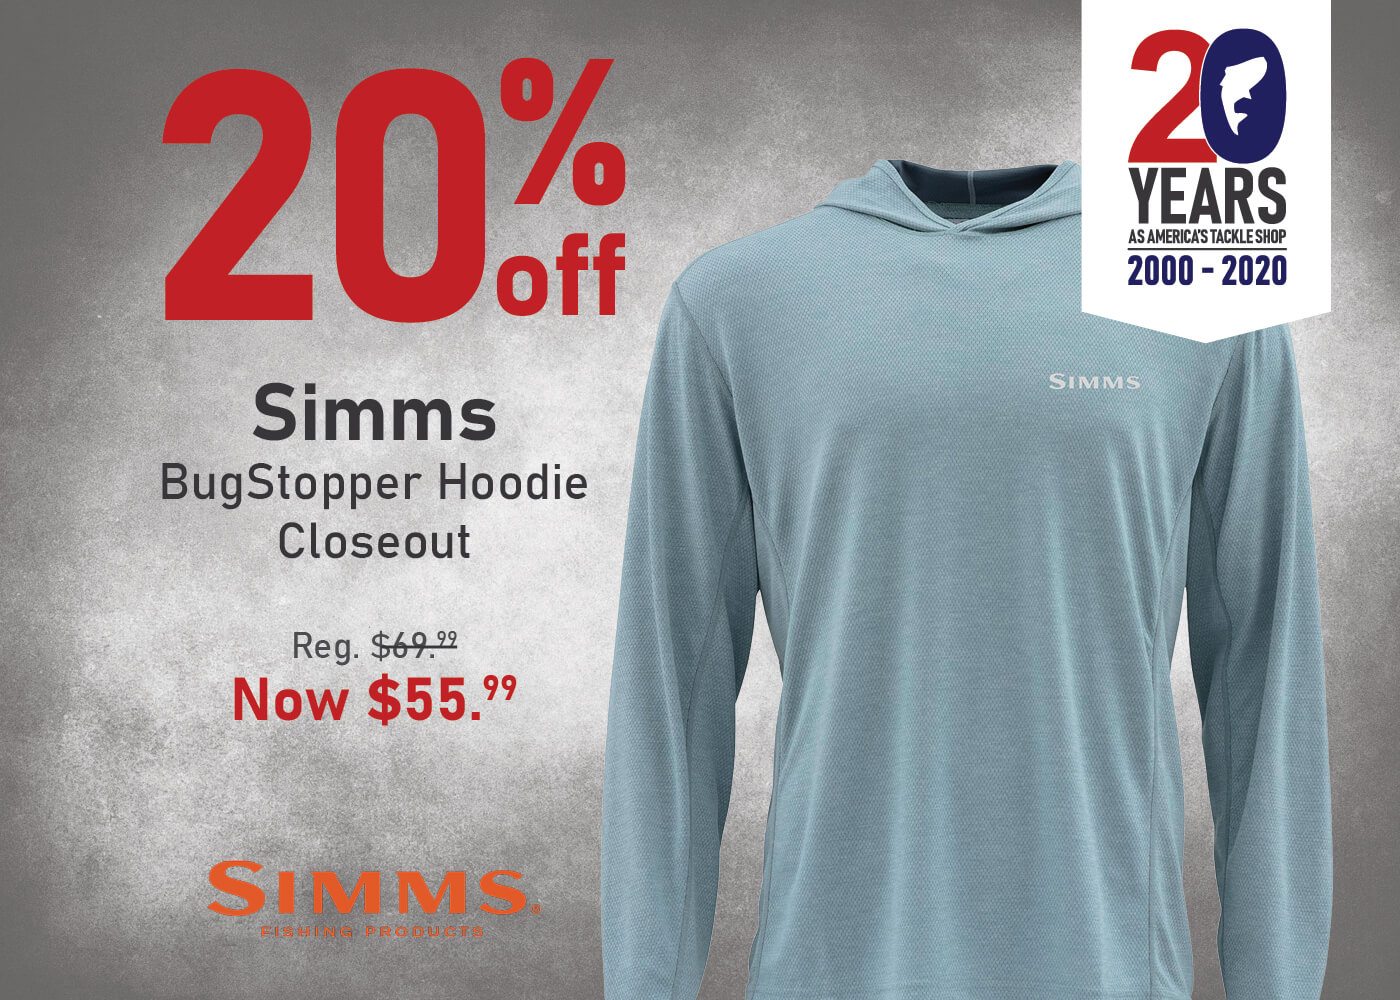 Save 20% on the Simms BugStopper Hoodie - Closeout